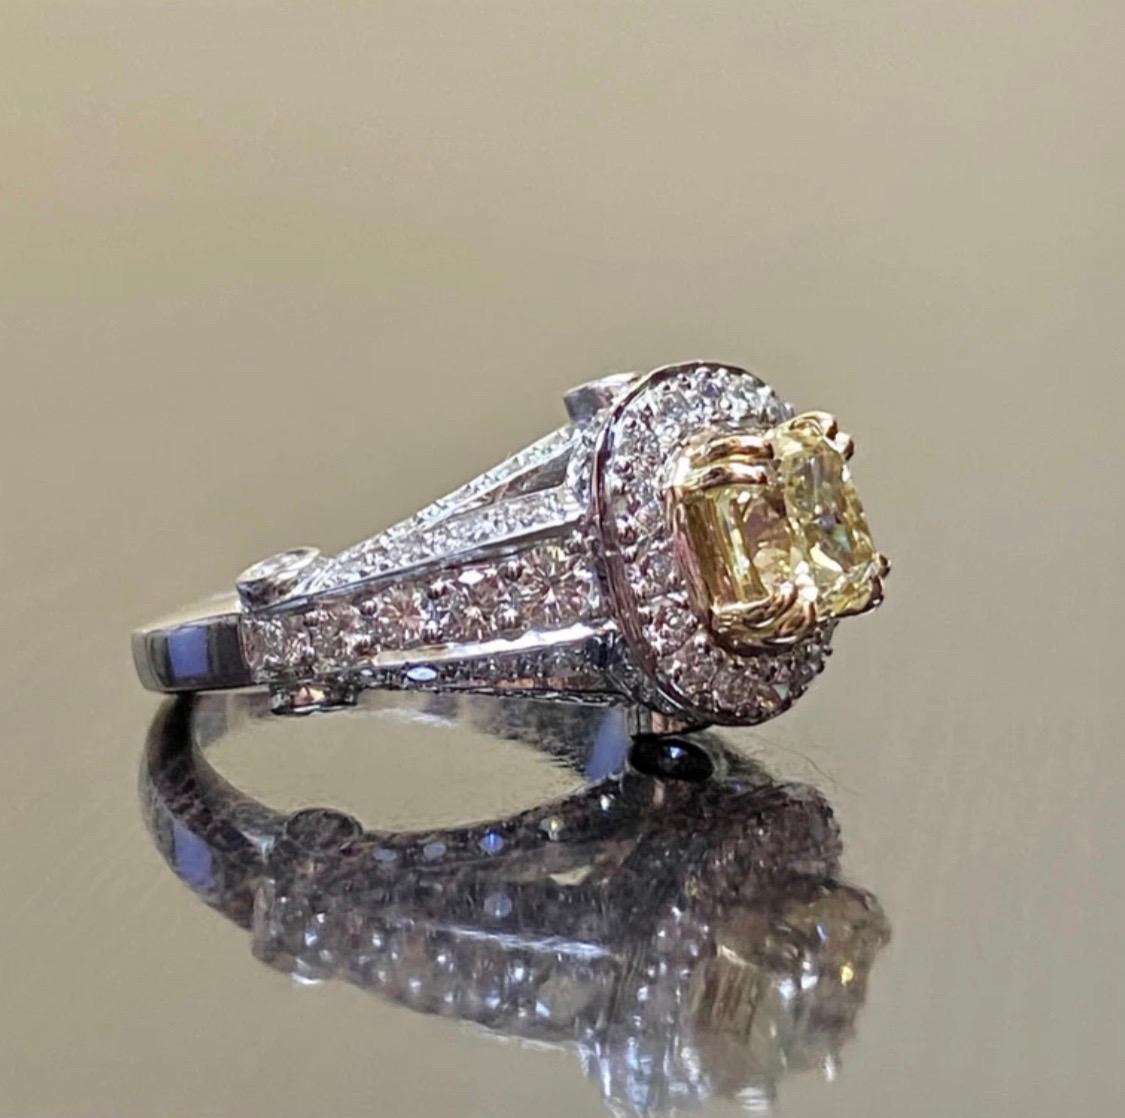 GIA Certified 1.28 Carat Fancy Light Yellow Cushion Cut Diamond Engagement Ring In New Condition For Sale In Los Angeles, CA